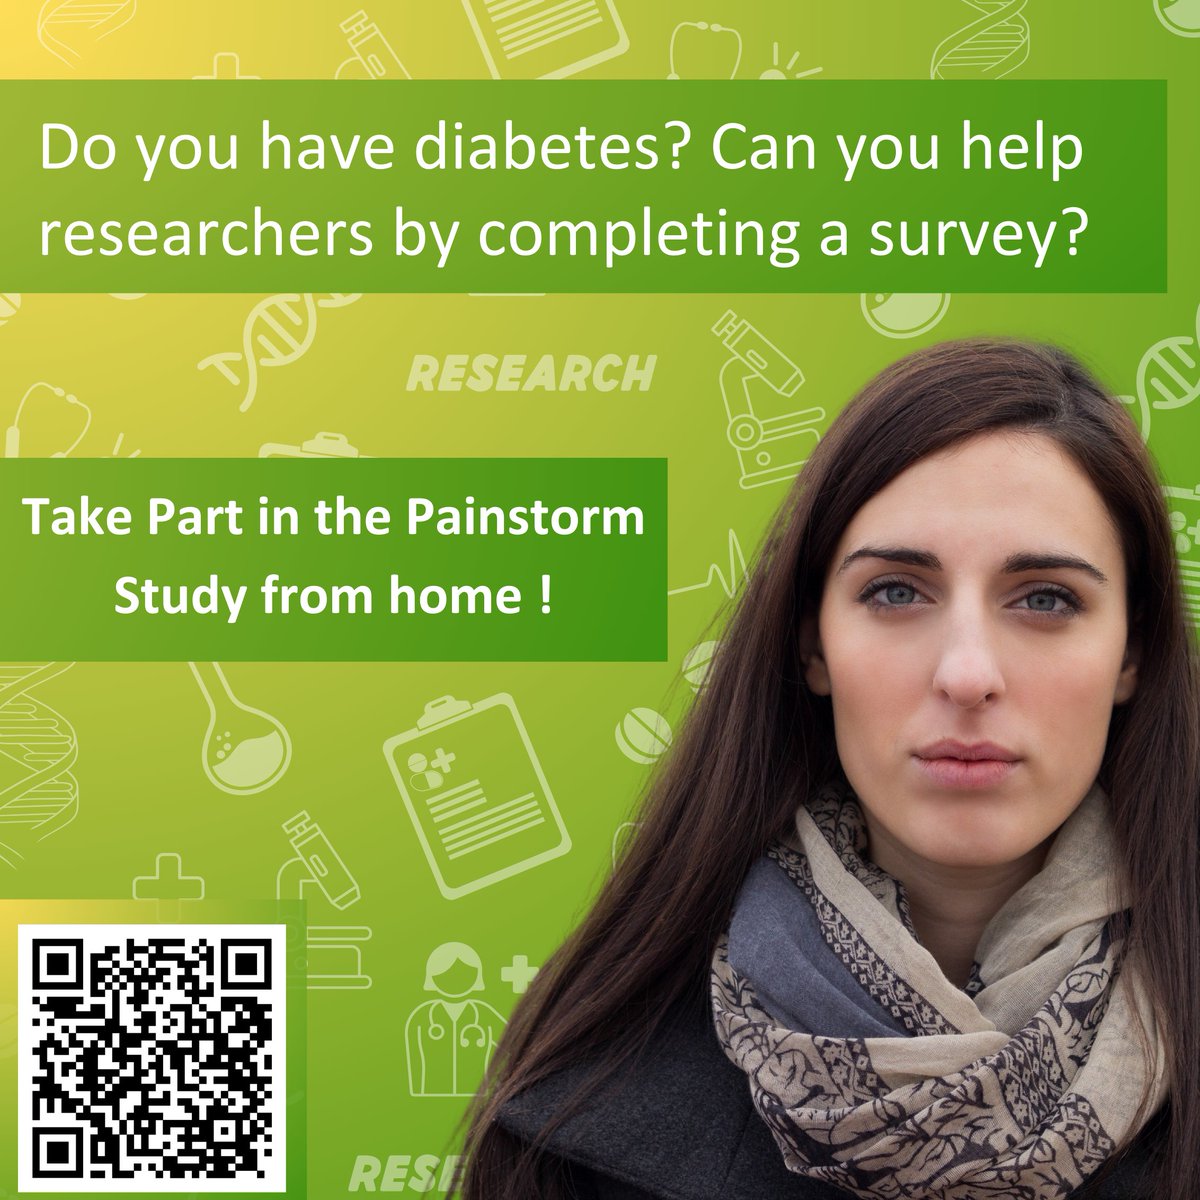 Take part in the Painstorm study. We're looking for people who have diabetes to complete a health survey from home. Register now - registerforshare.org #diabetesscotland #diabetes #scotland